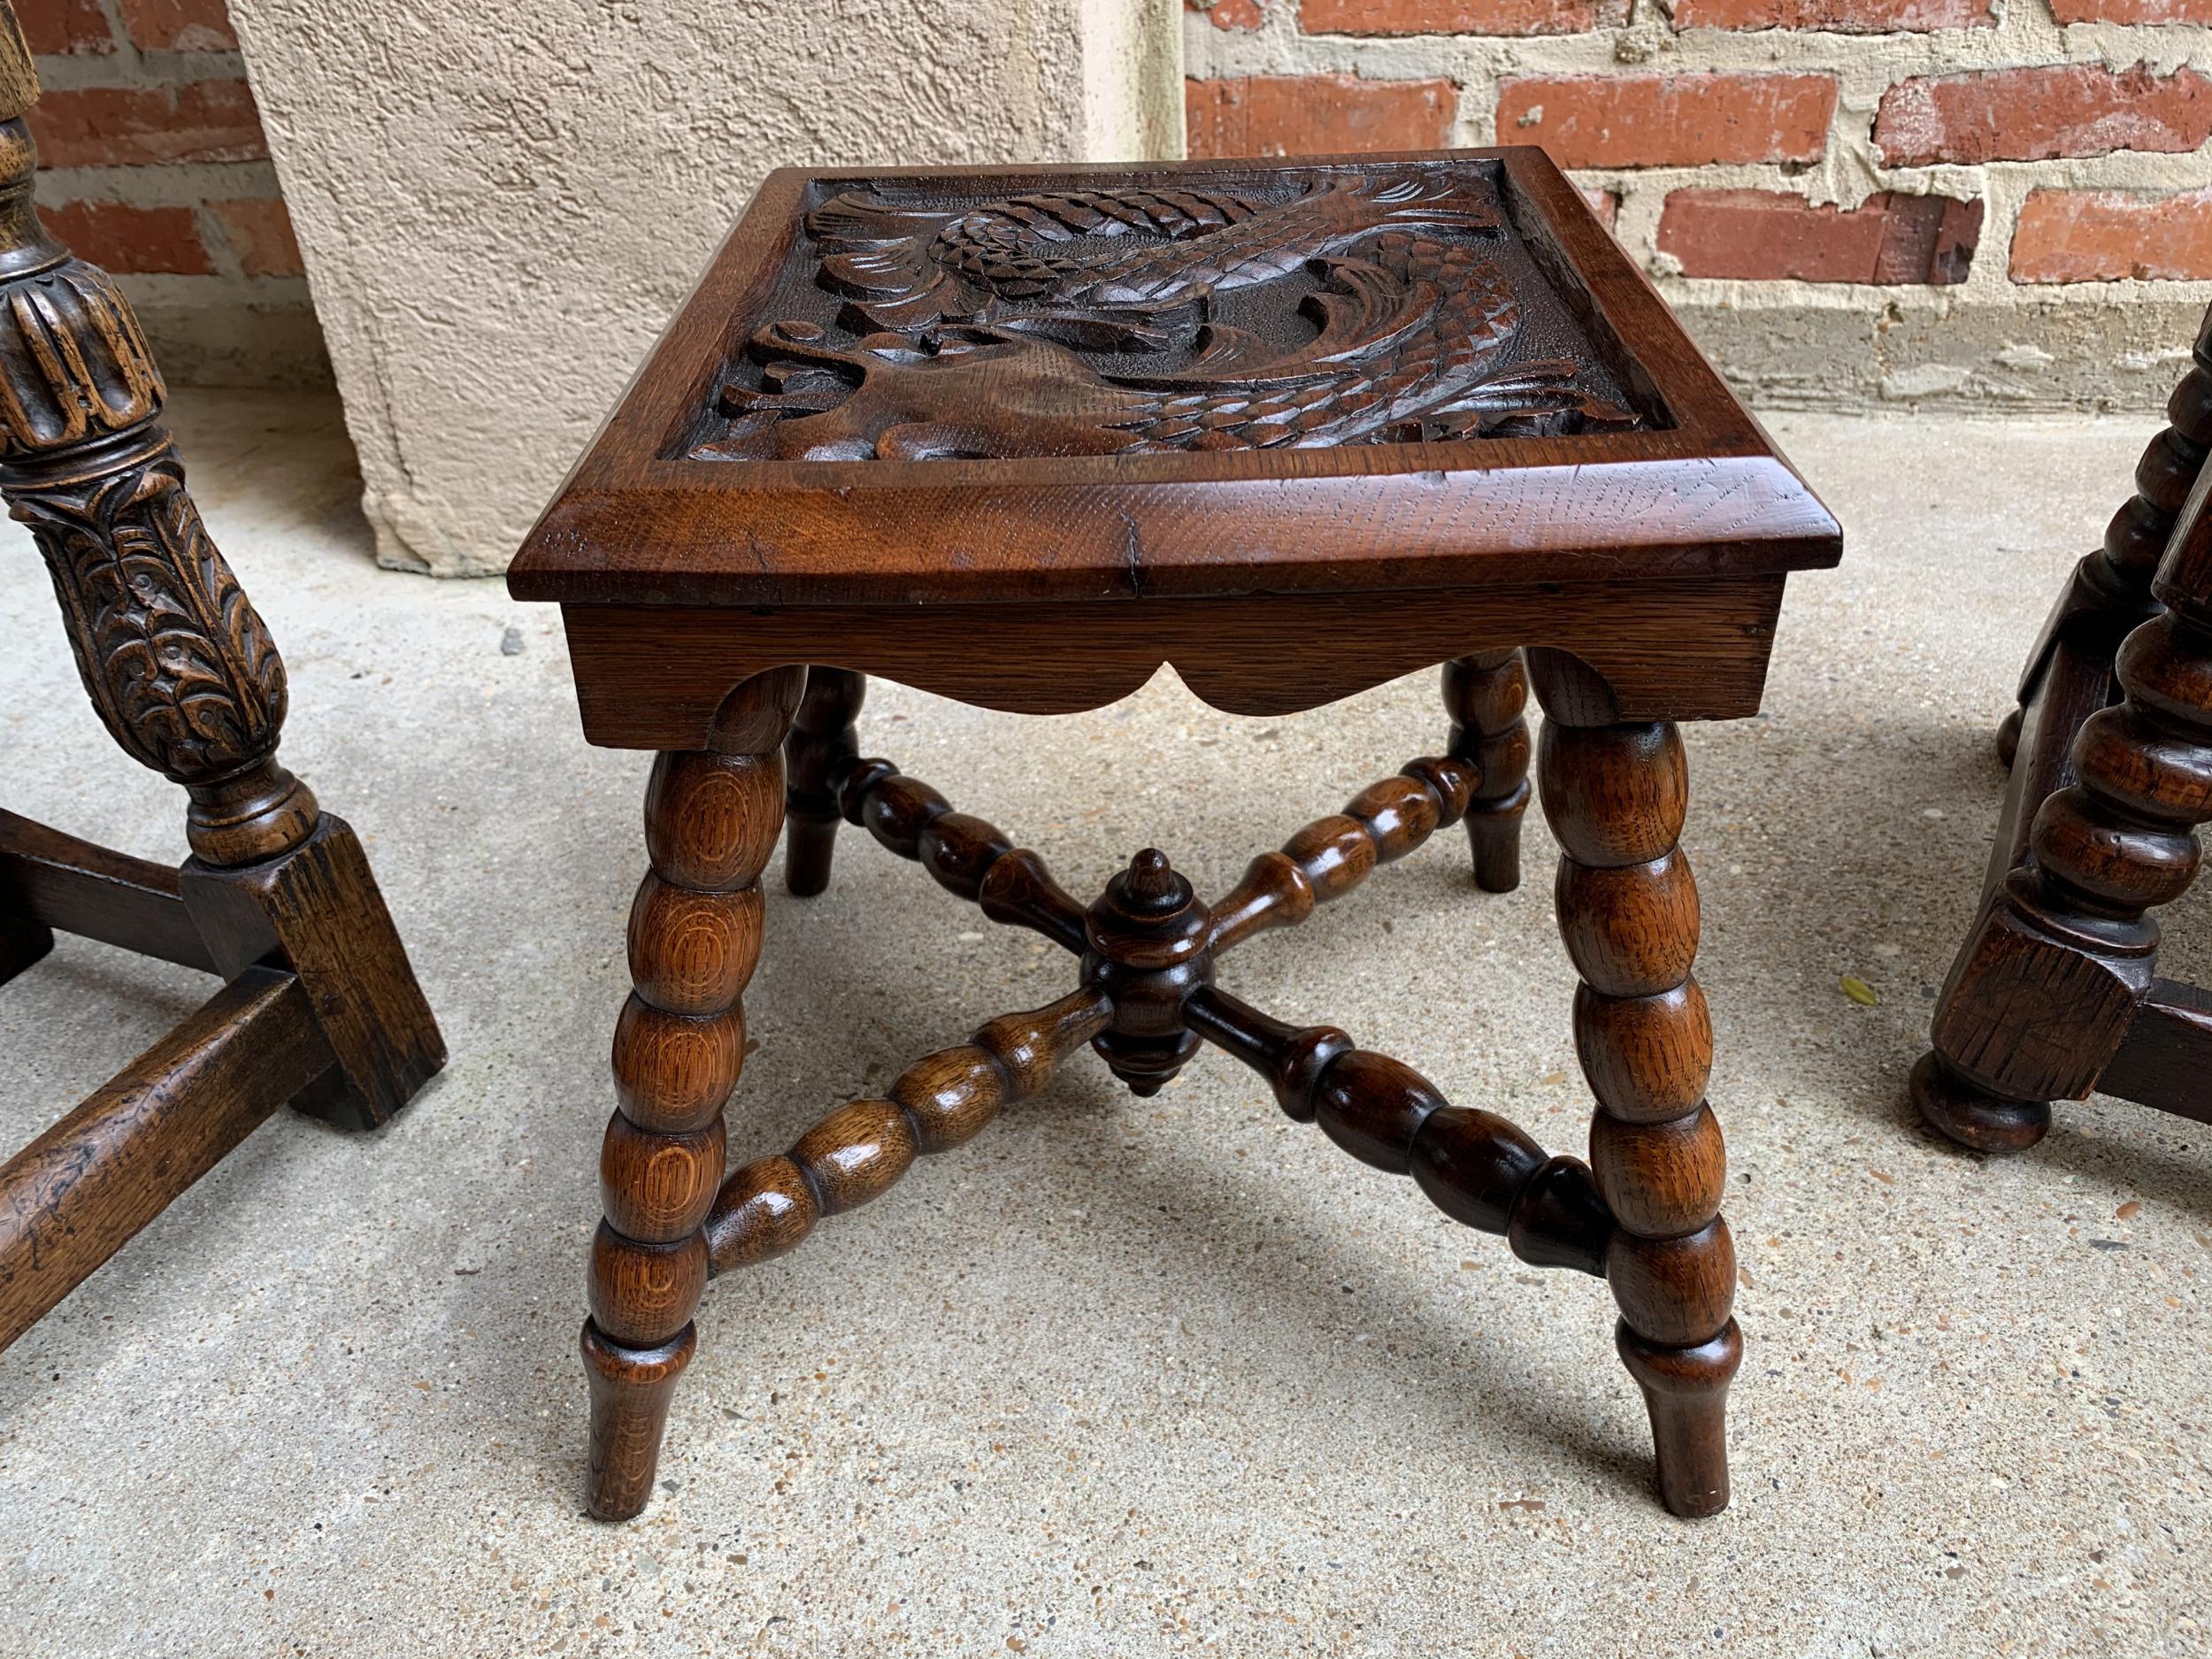 British Antique English Carved Bench Stool End Table Square Display Stand Renaissance 